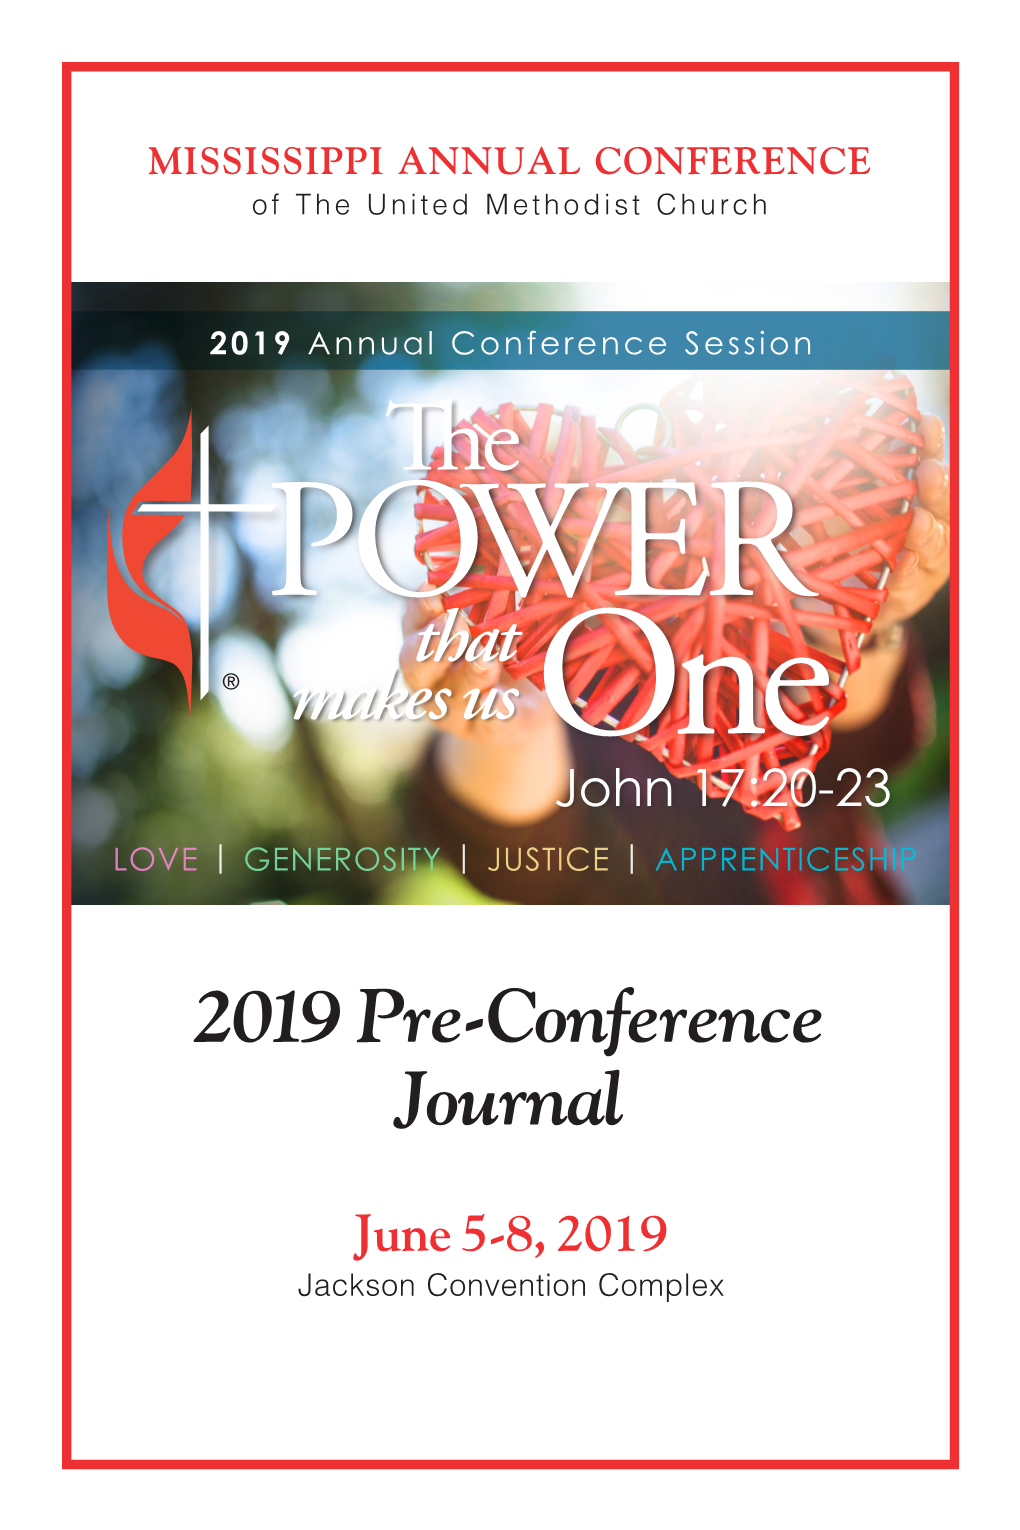 2019 Pre-Conference Journal